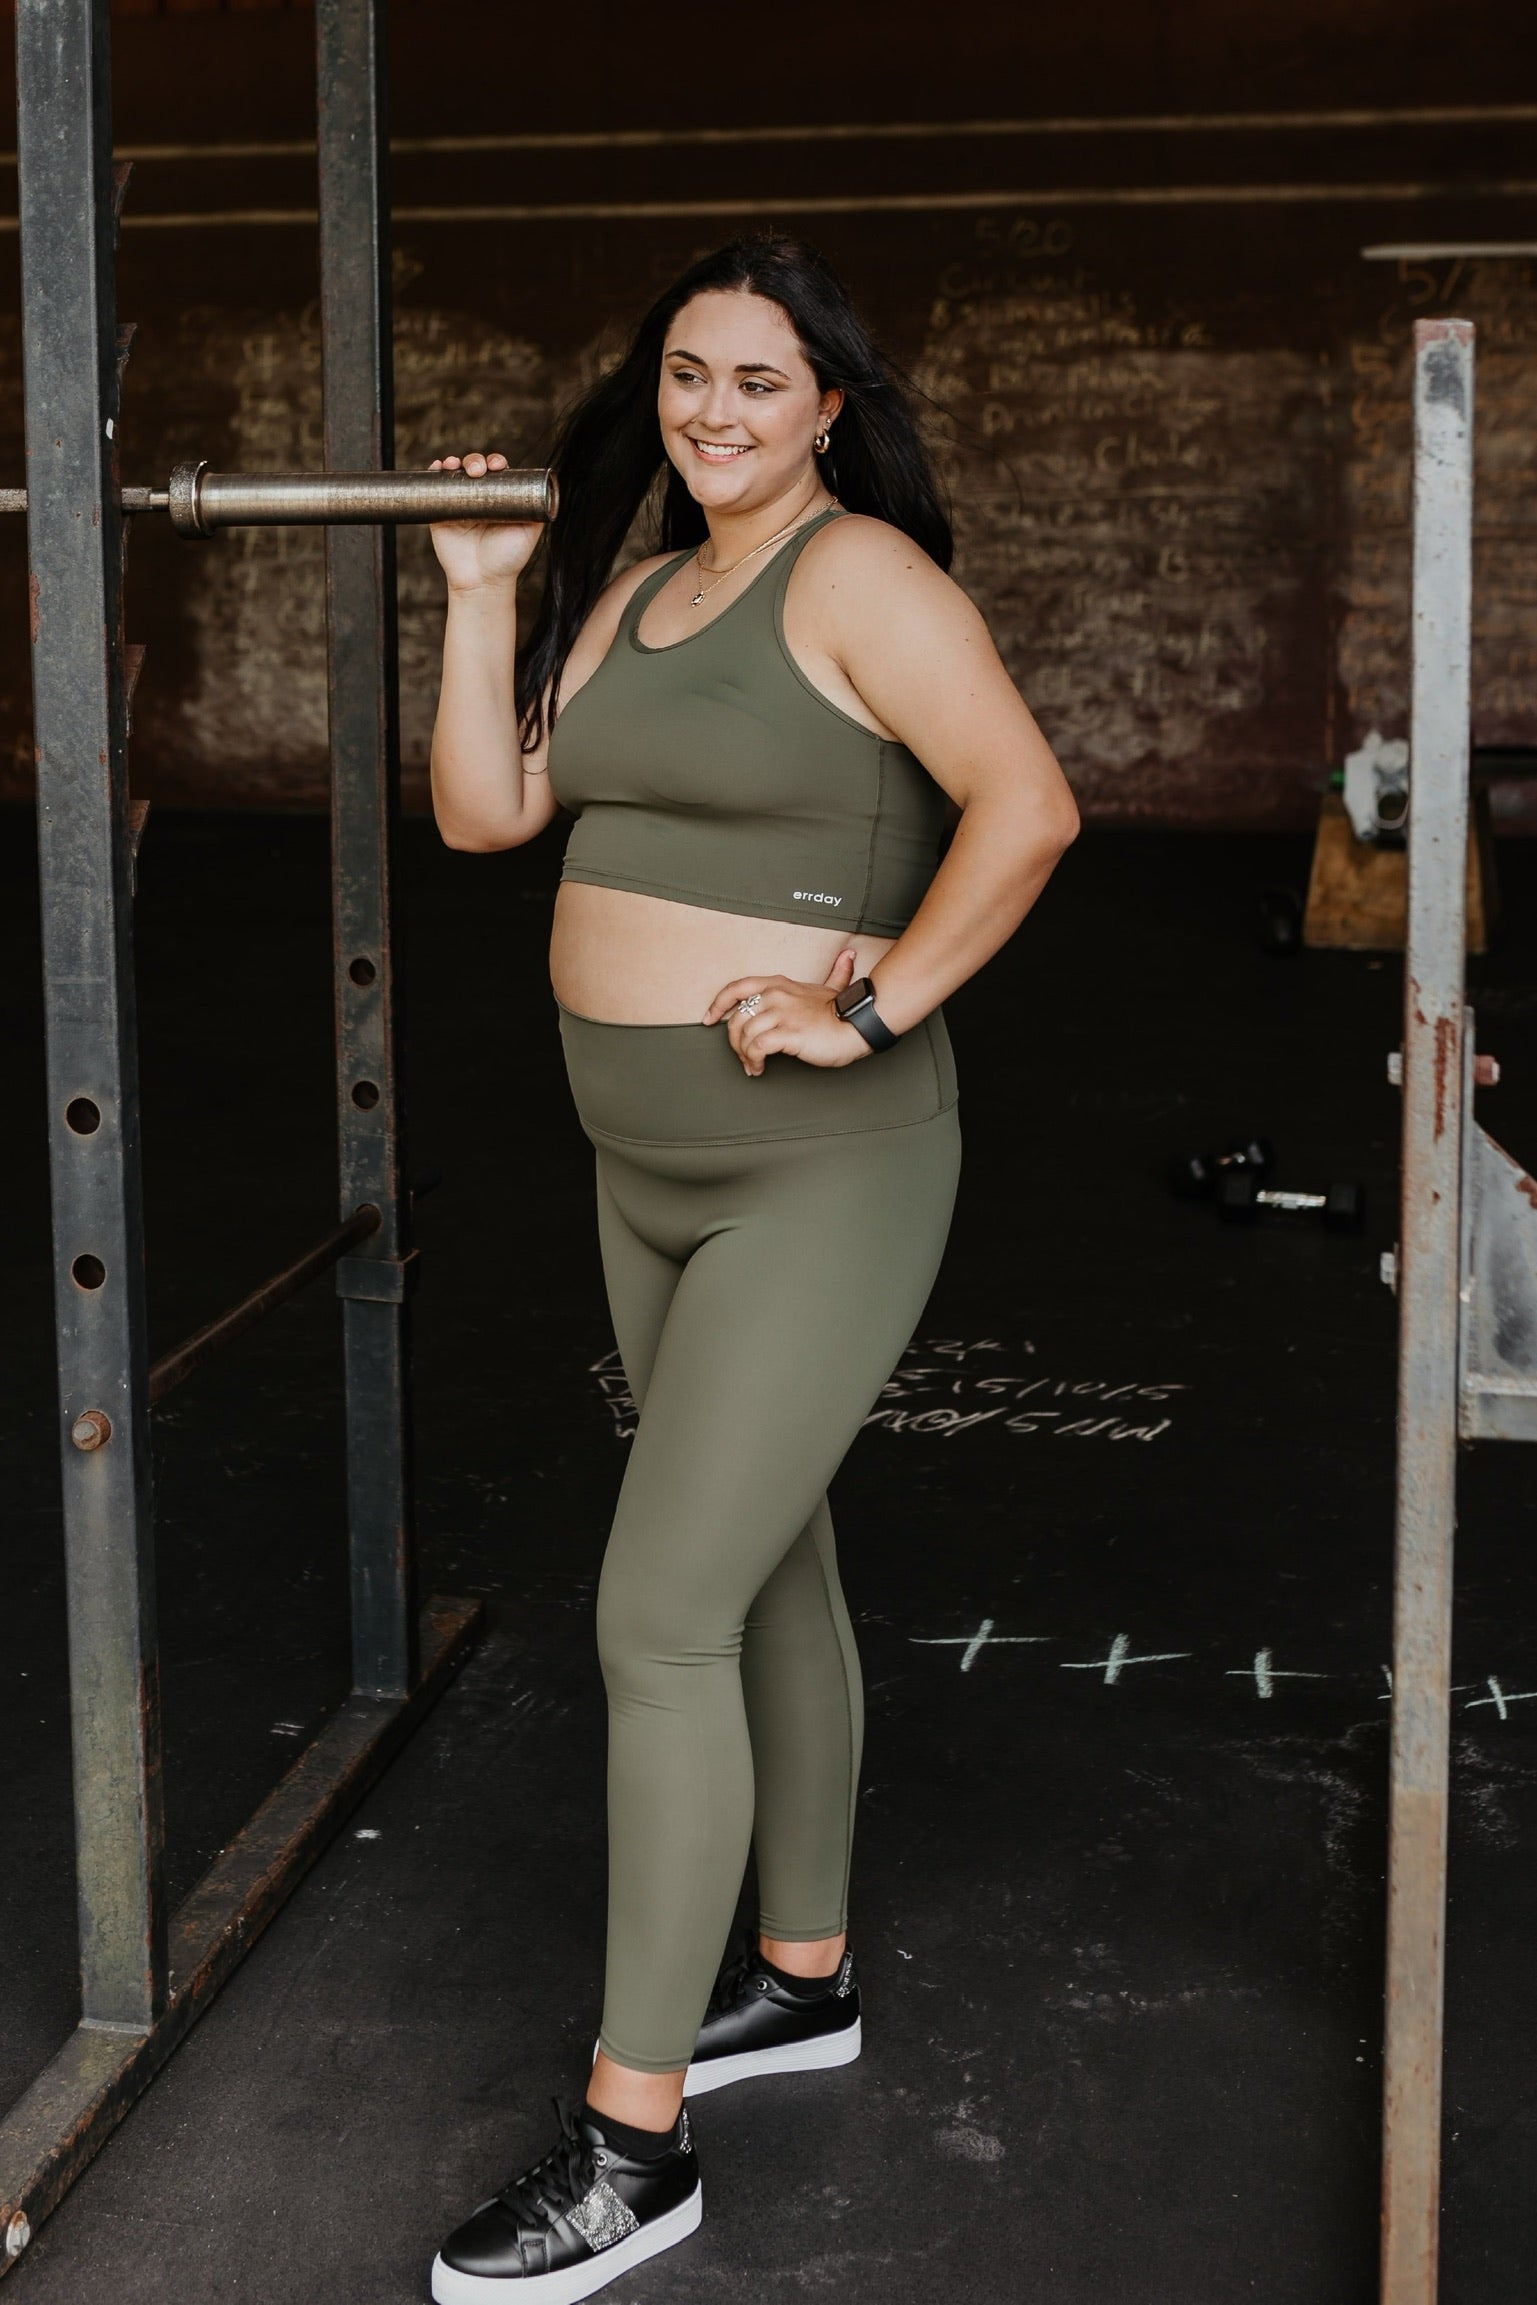 Finish Line Non Pocket Leggings in Olive Green - Giddy Up Glamour Boutique